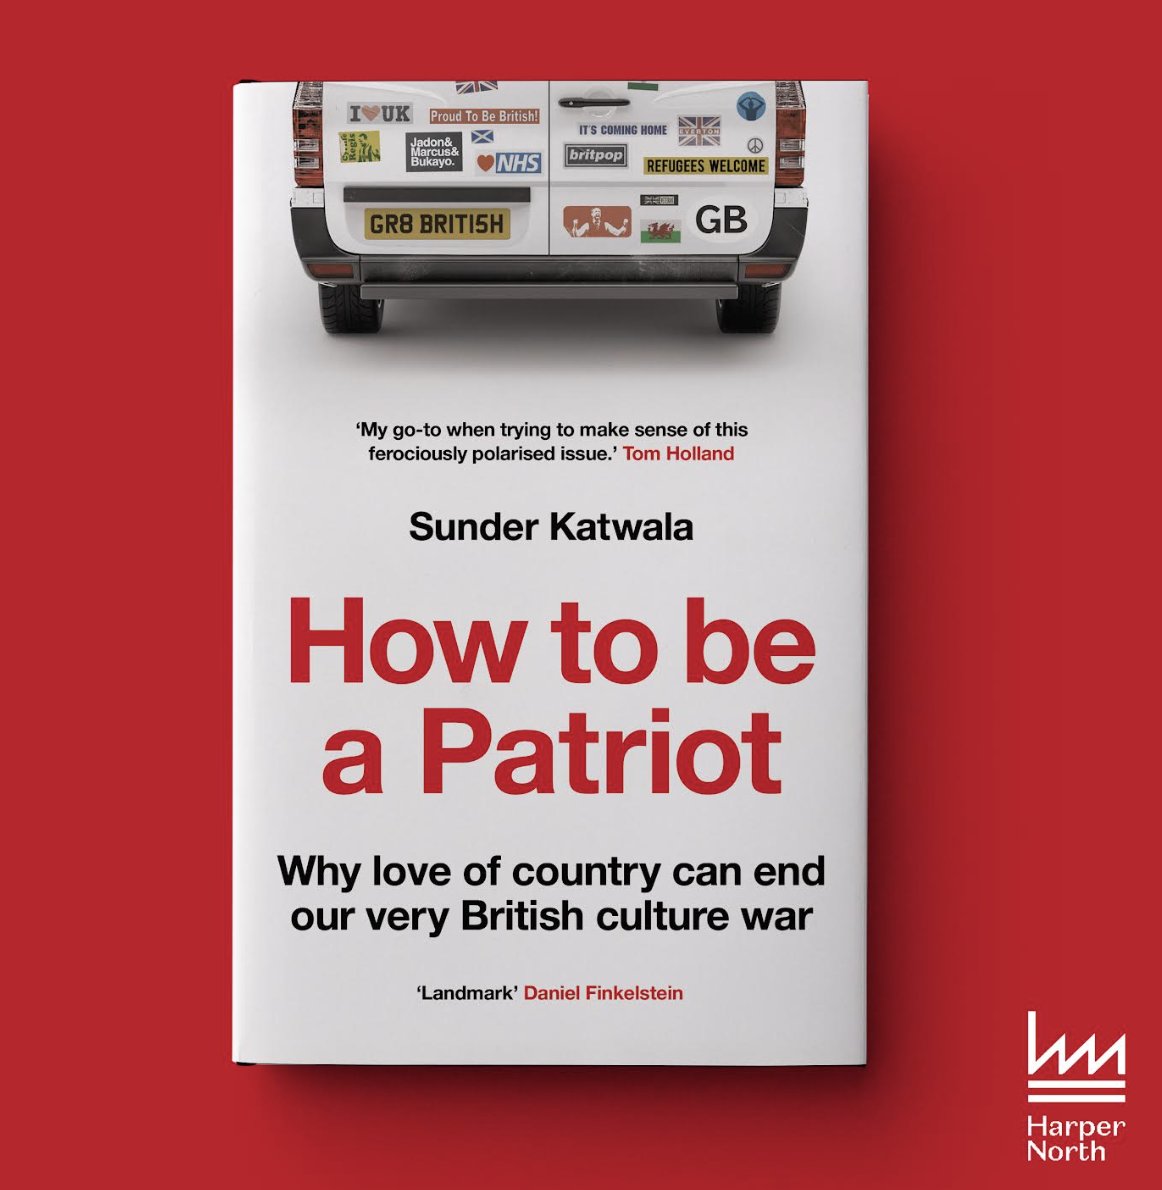 My Very British Patriotism. Read the Introduction of my new book 'How to be a patriot' on my personal journey on identity questions. The Kindle edition is available now ahead of this Coronation bank holiday. The book is published on 25th May @HarperNorthUK britishfuture.org/my-very-britis…